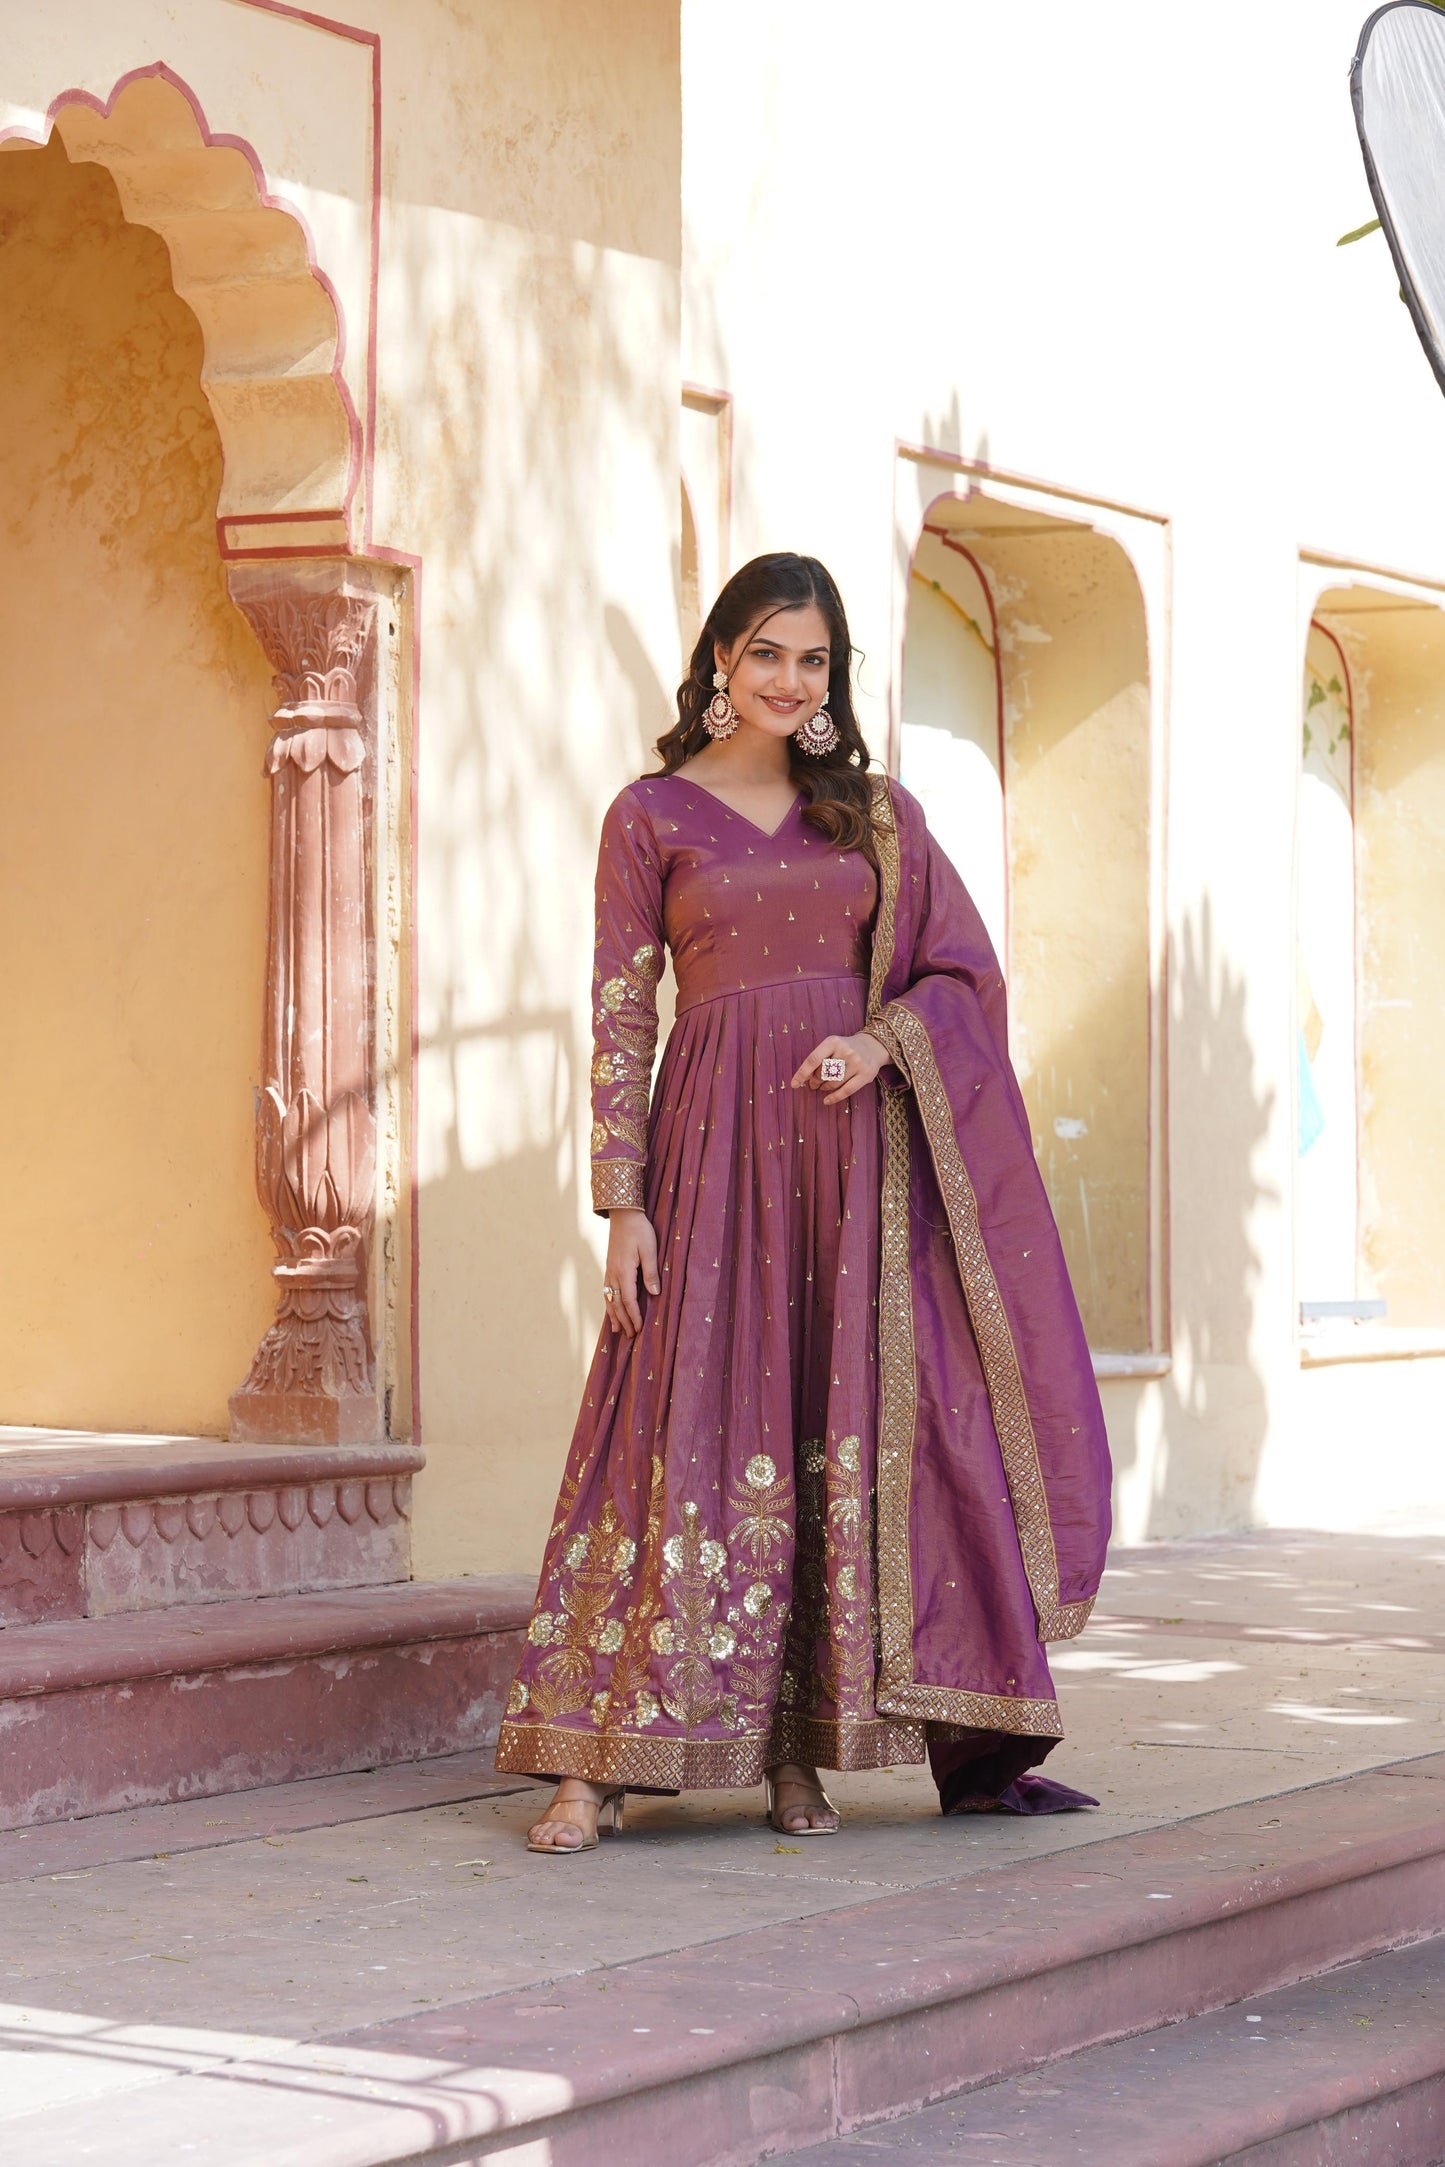 Dusty Pink Celestial Cosmos Embroidered Viscose Ensemble - Inayakhan Shop 